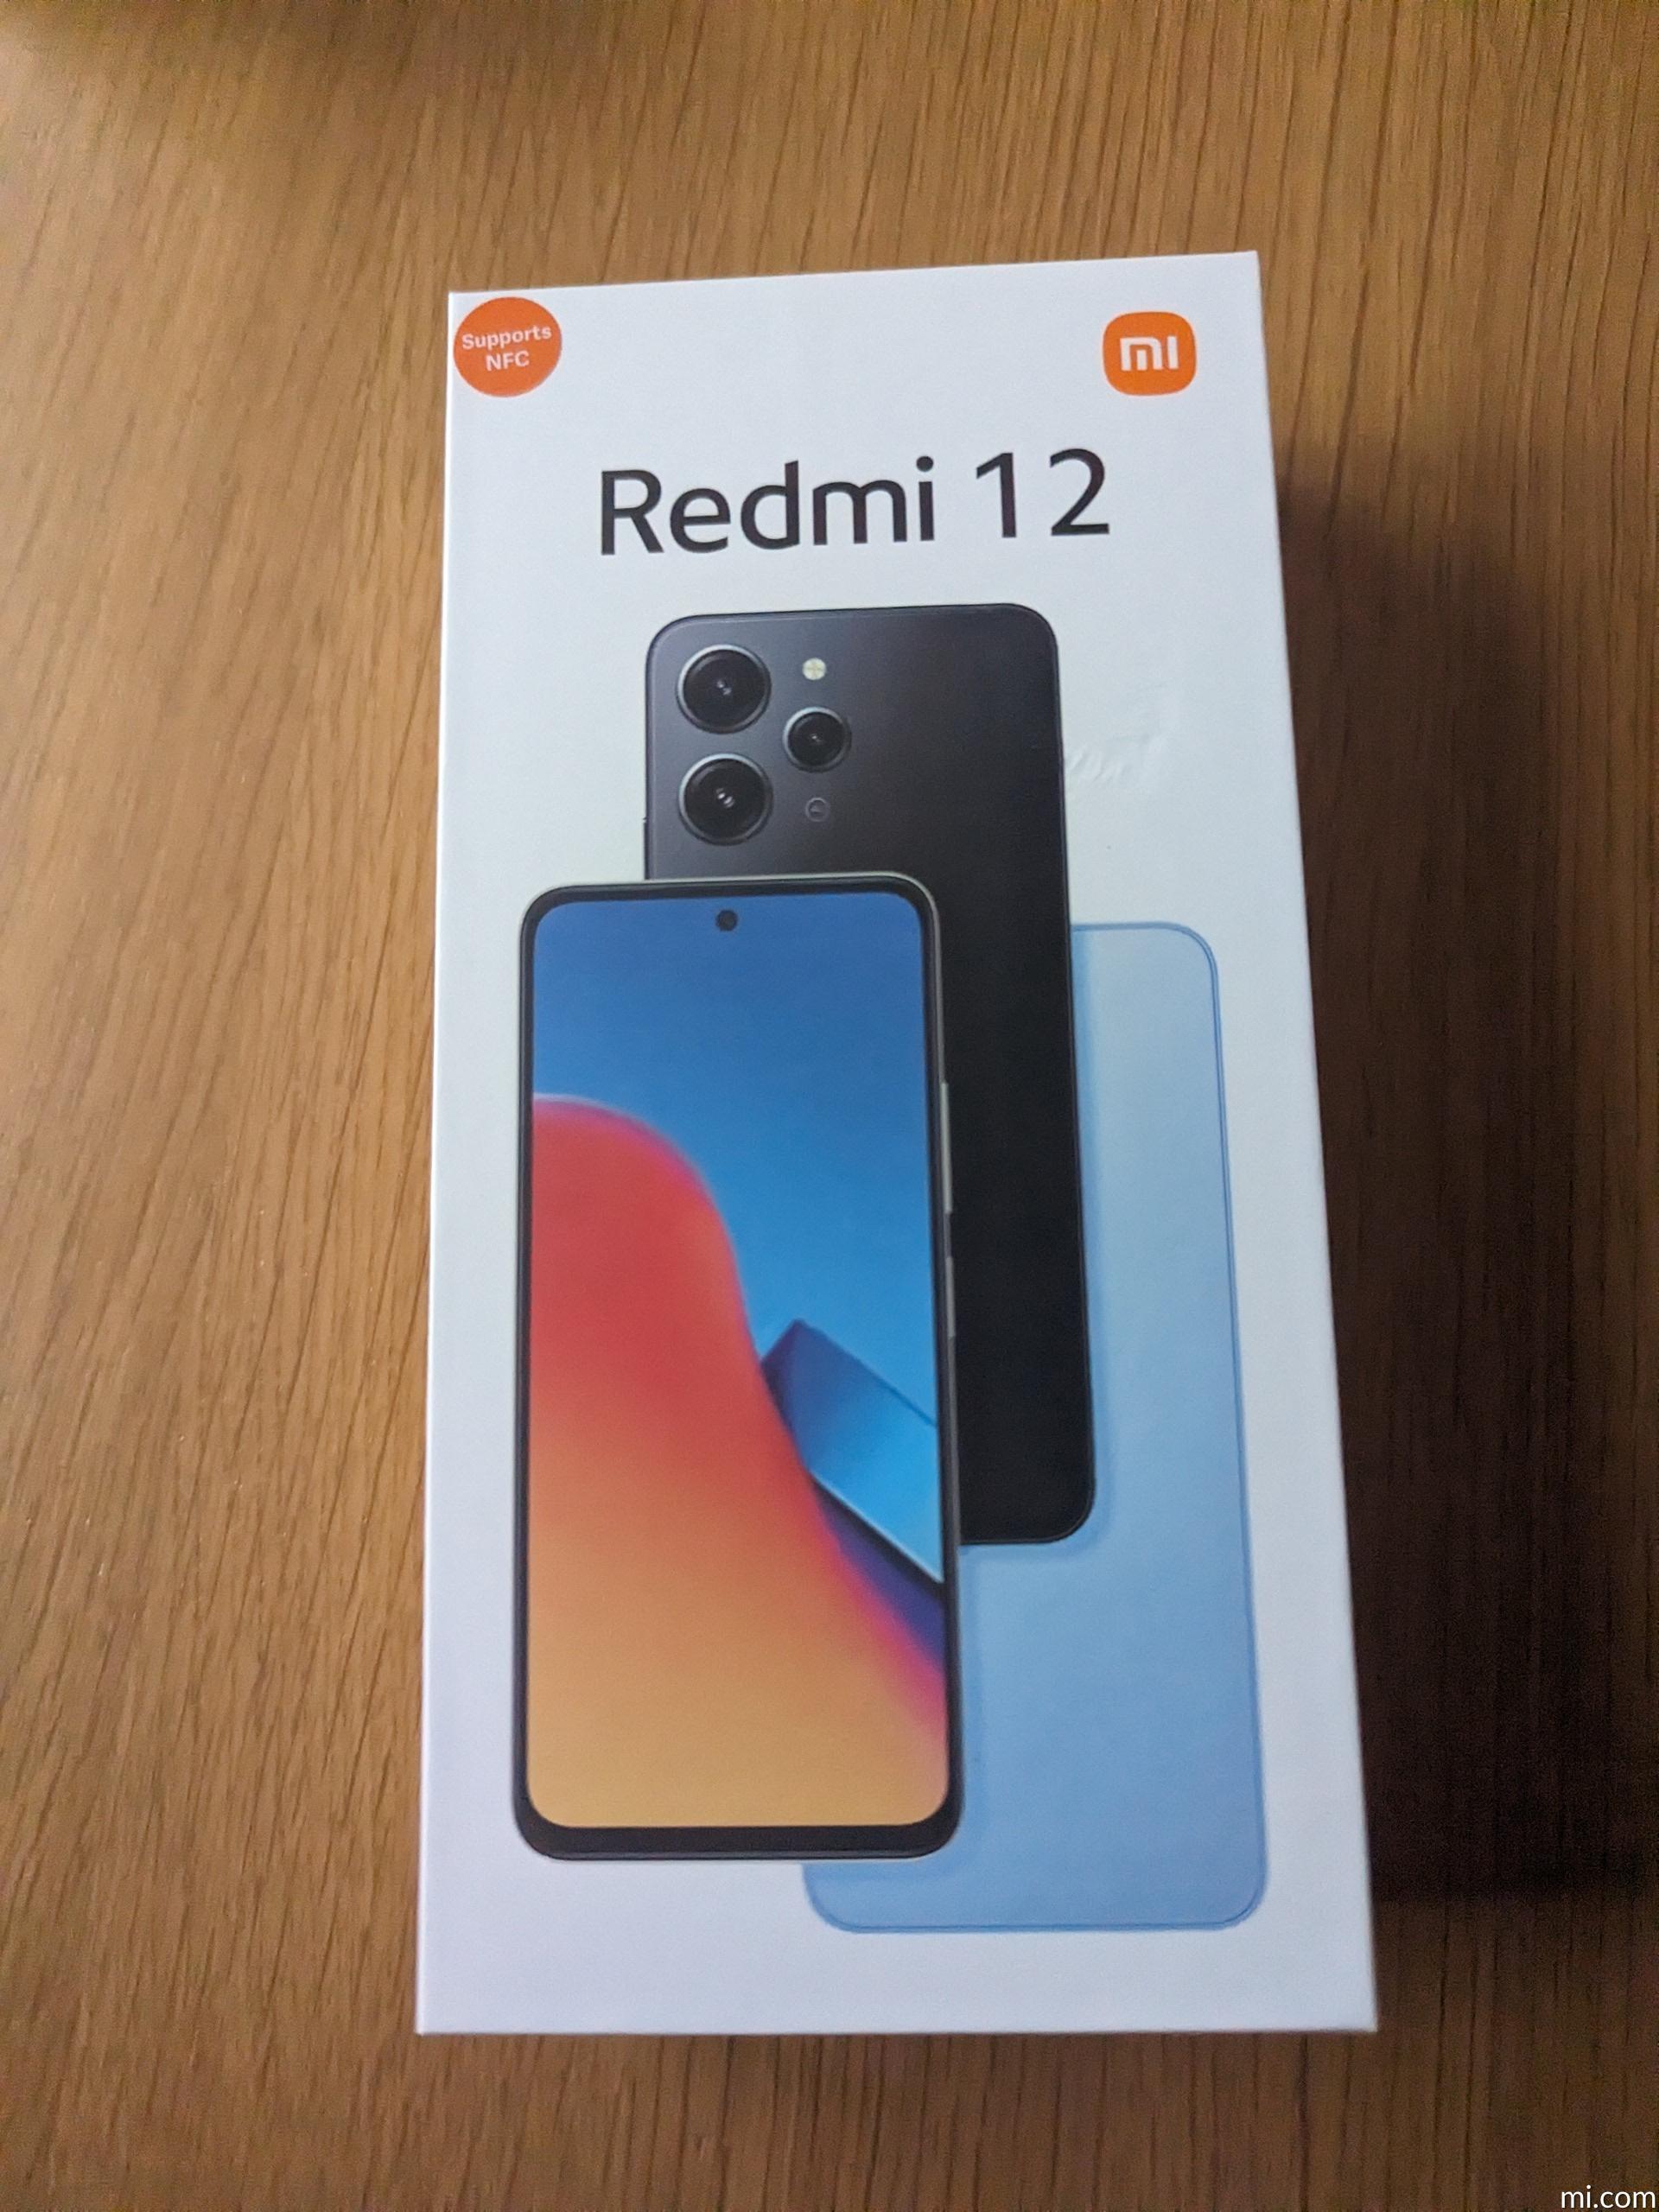 Xiaomi Redmi 12C Global Version 6.71 Inch Smartphone With 50MP Camera,  Helio G85 Octa Core, And 5000mAh High Capacity Battery From Mi668, $100.74